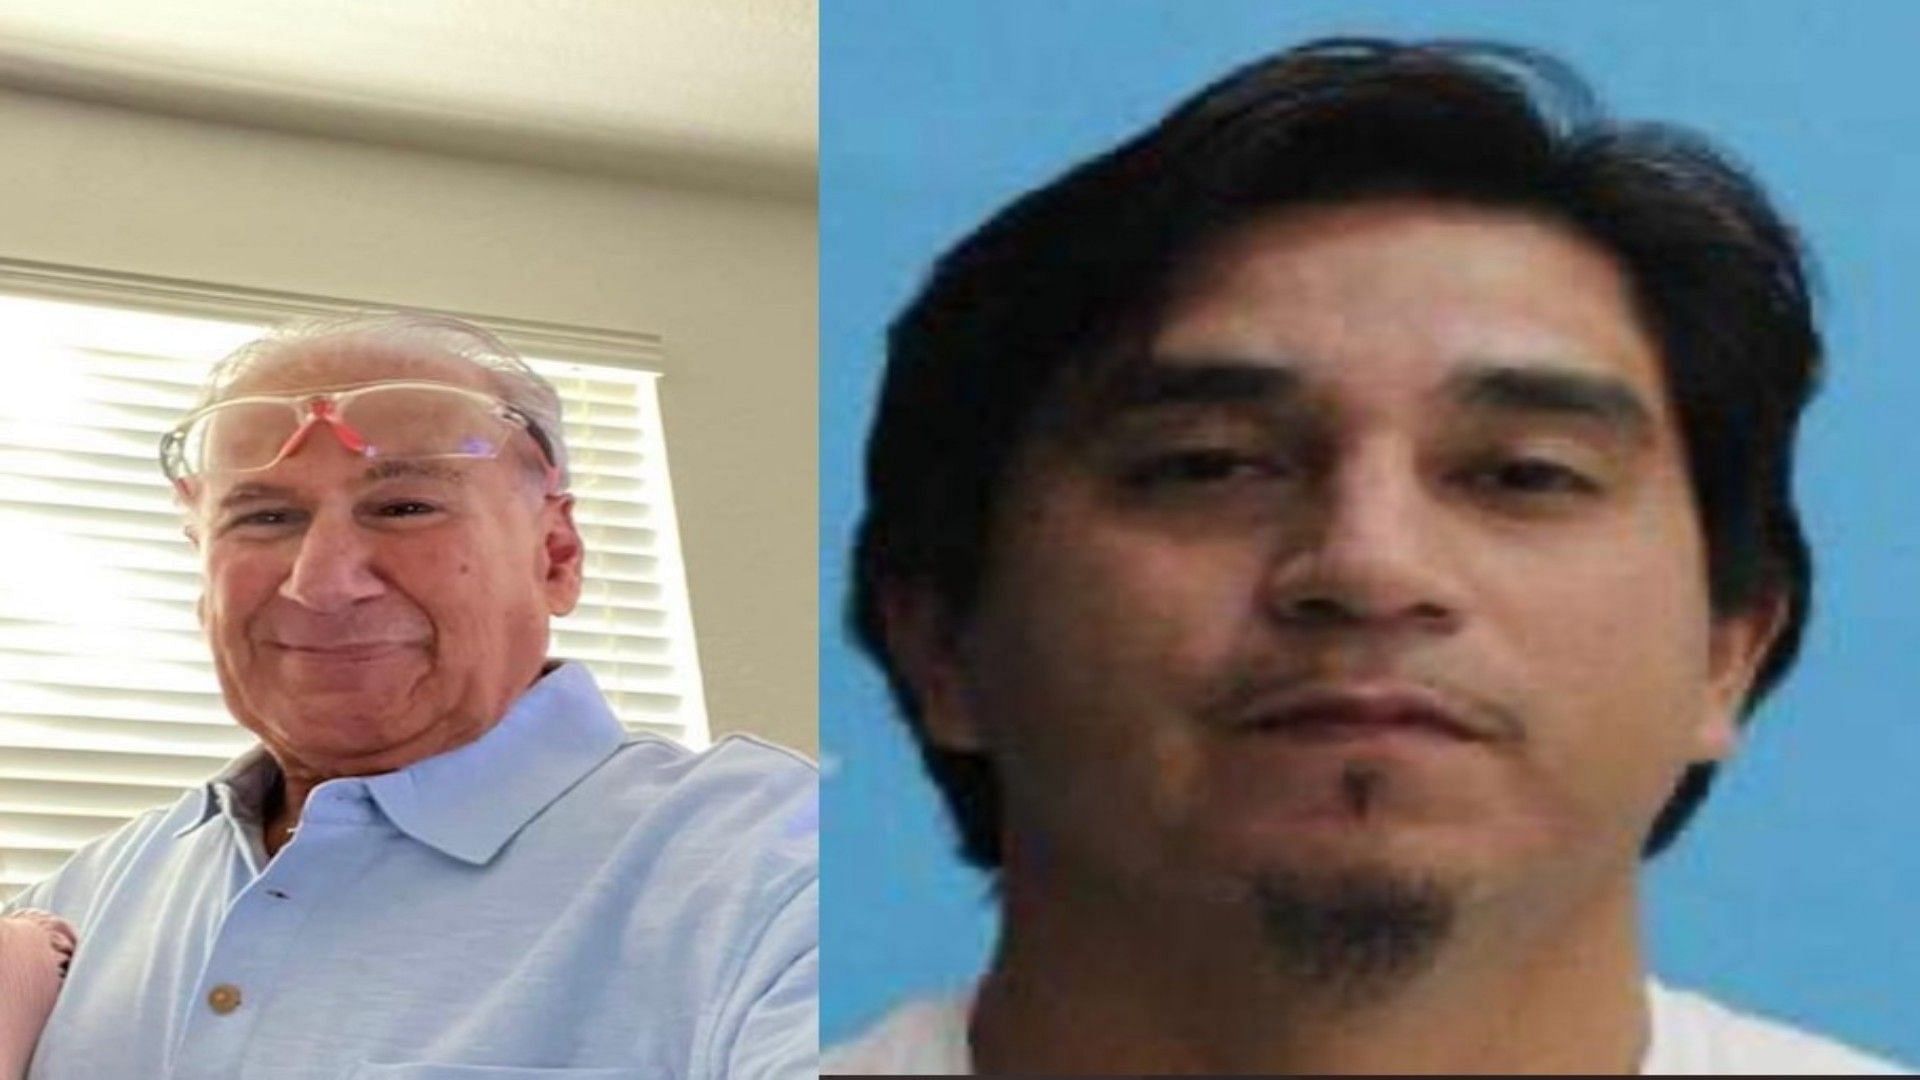 Suspect arrested in the disappearance of Gary Levin (L) (Image via Sooji Nam and Samair Nefzi/Twitter)